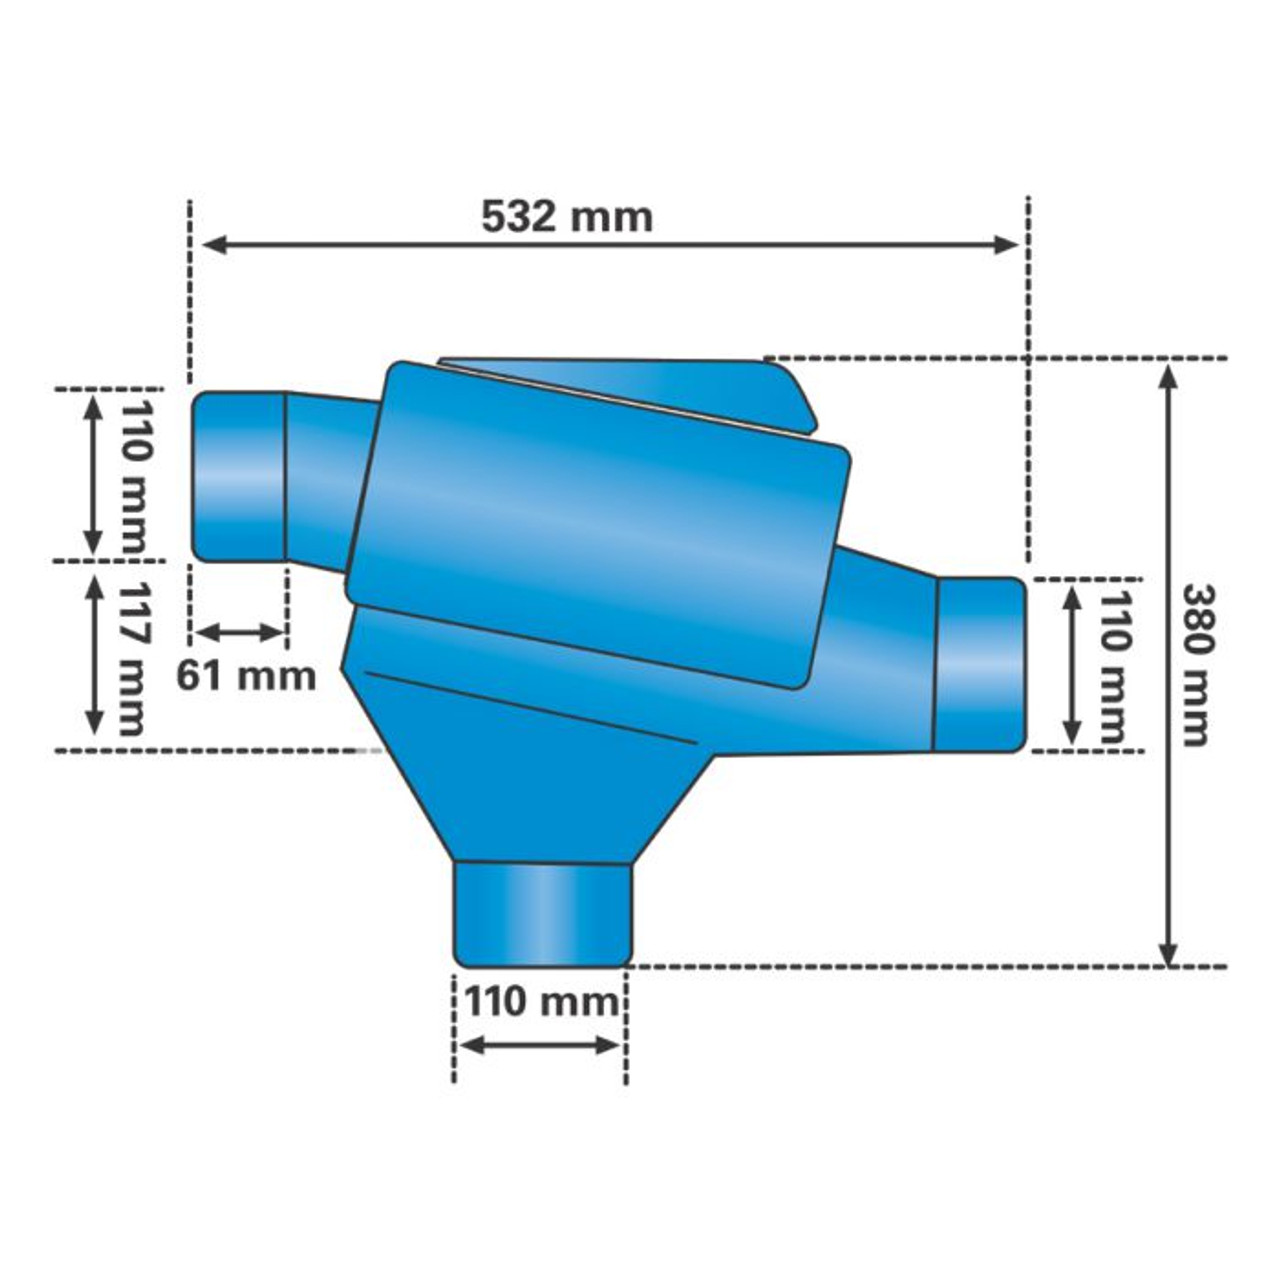 ZF In-tank Rainwater Filter Dimensions (Height and Length).